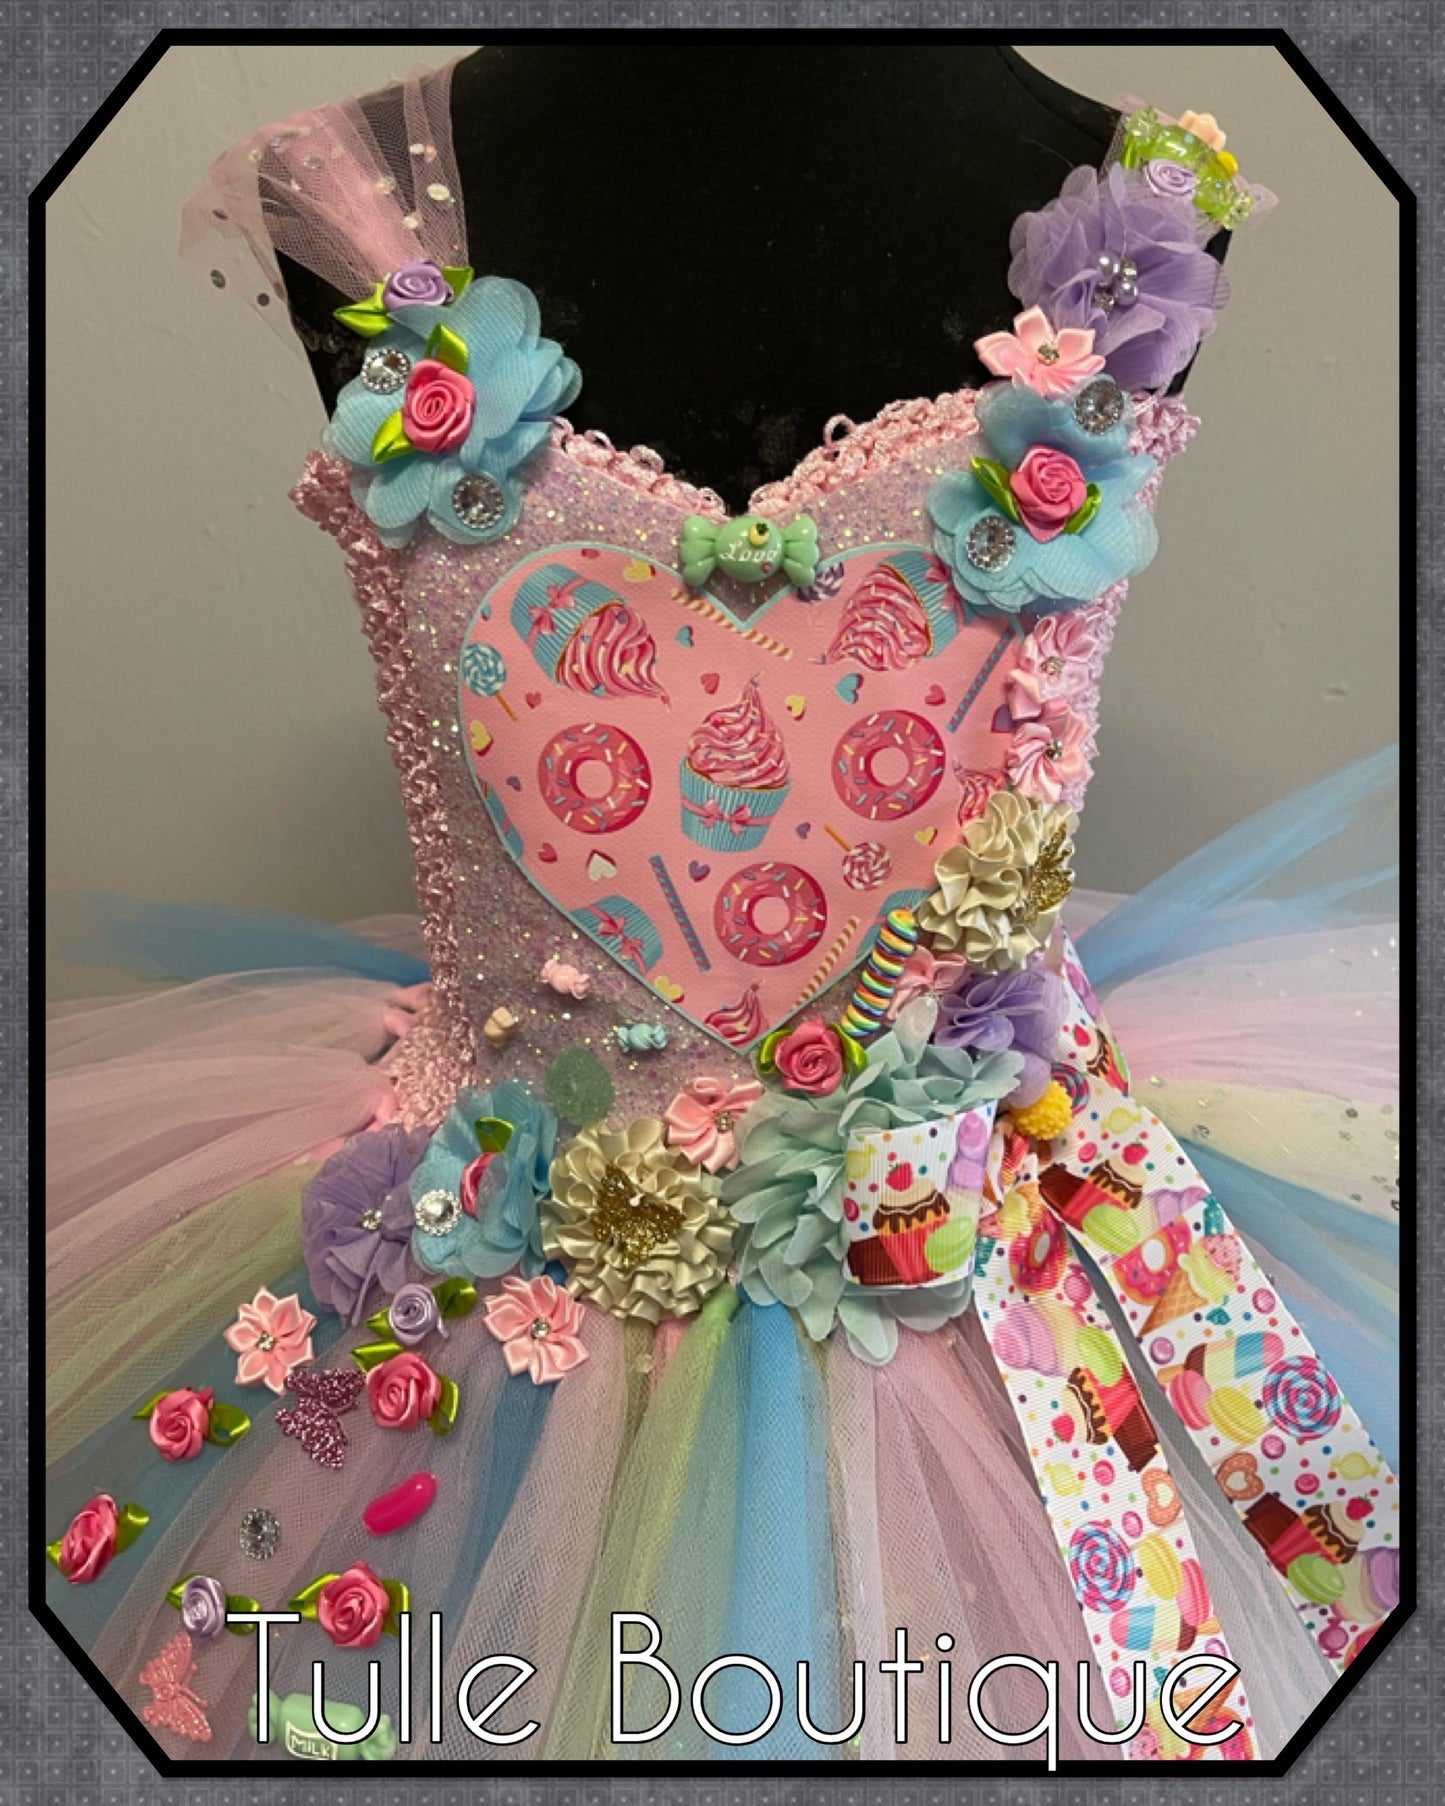 Candyland sweet and donuts birthday party tutu dress